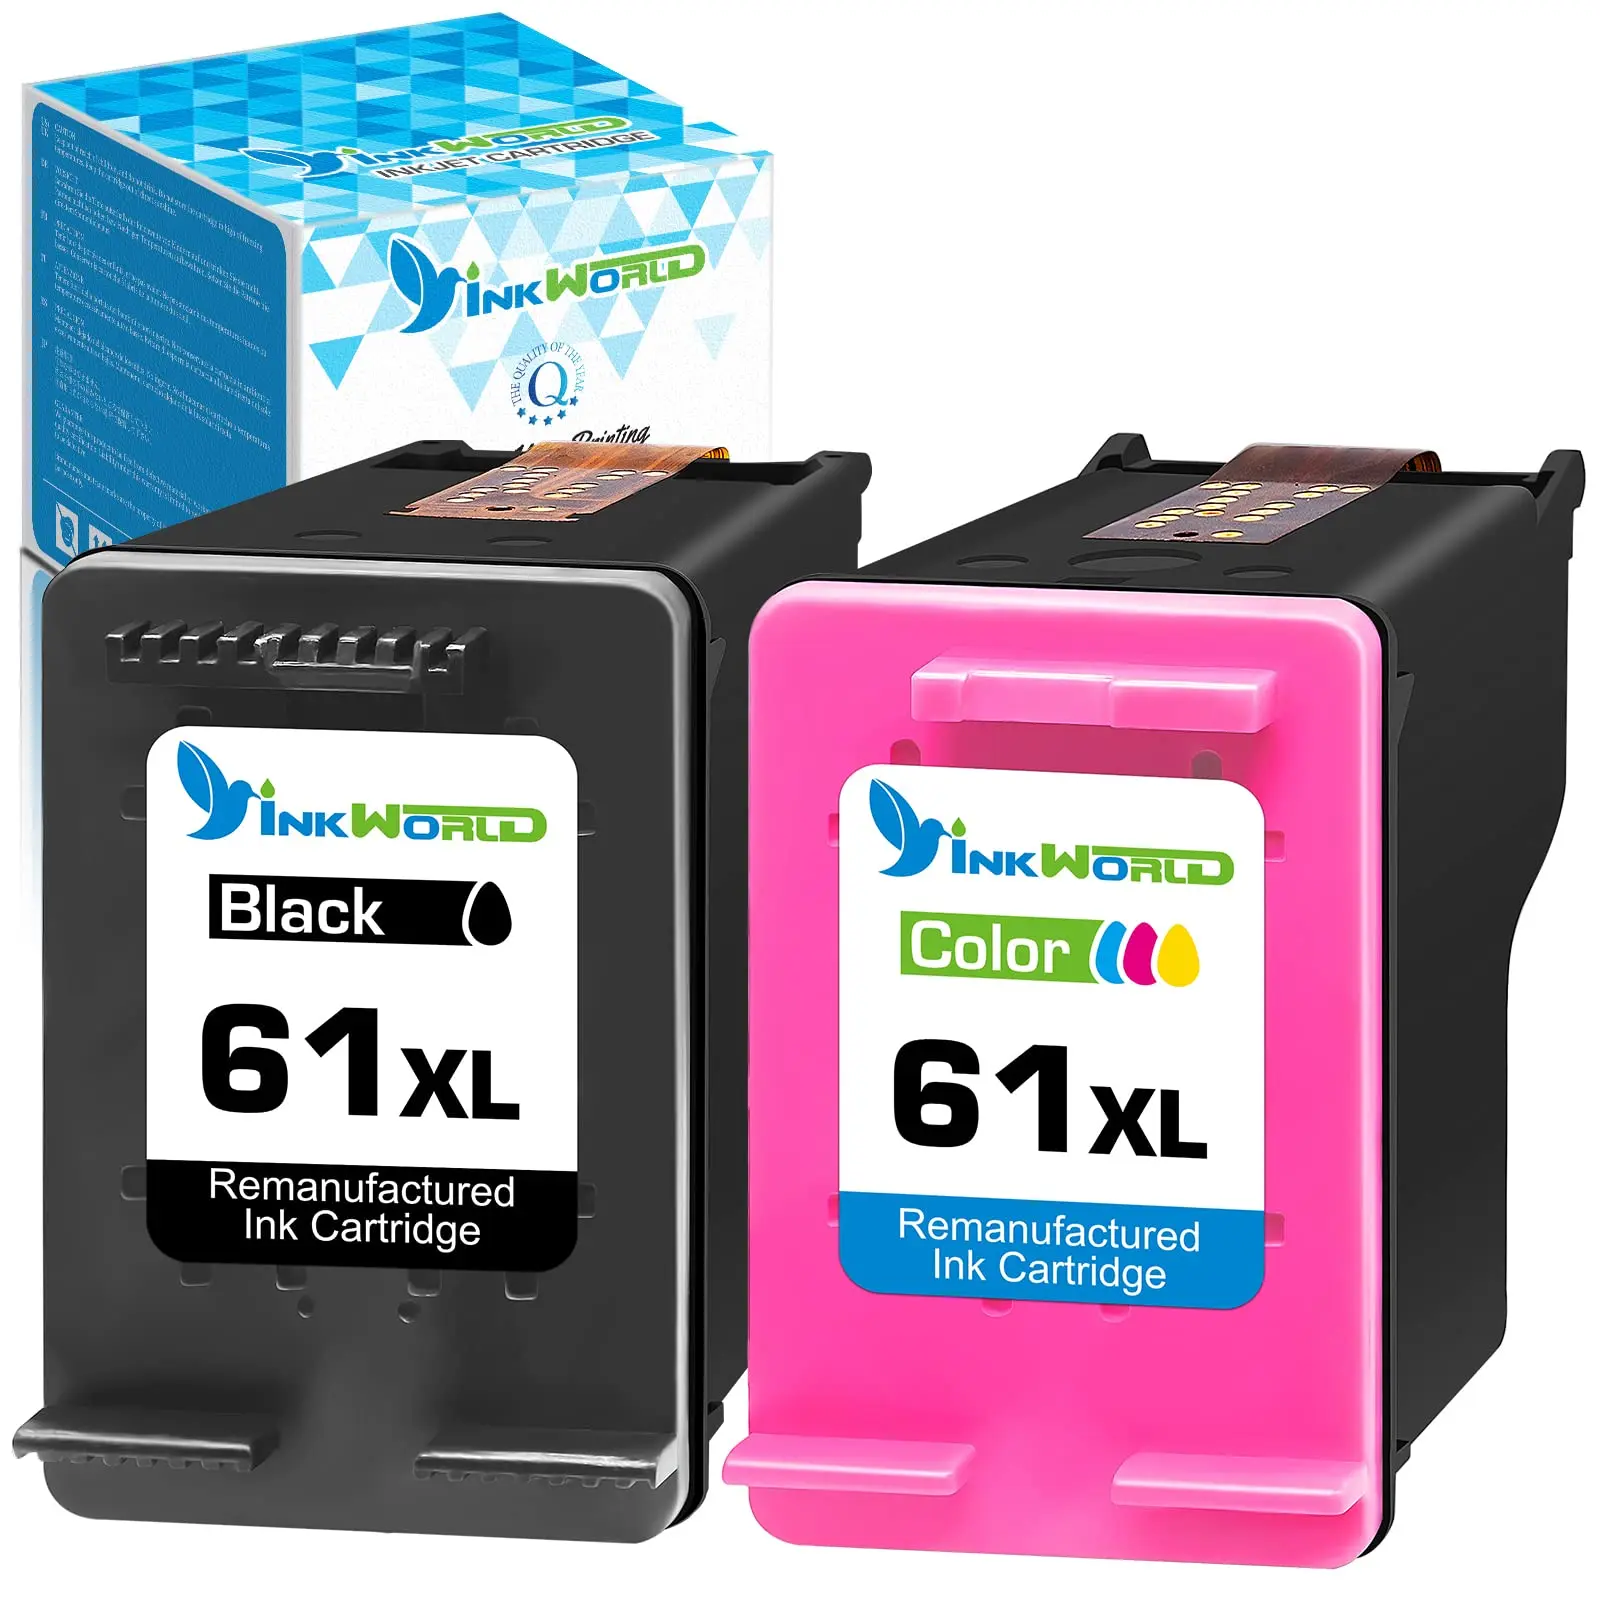 Hp officejet 4500 ink: ultimate guide & compatibility